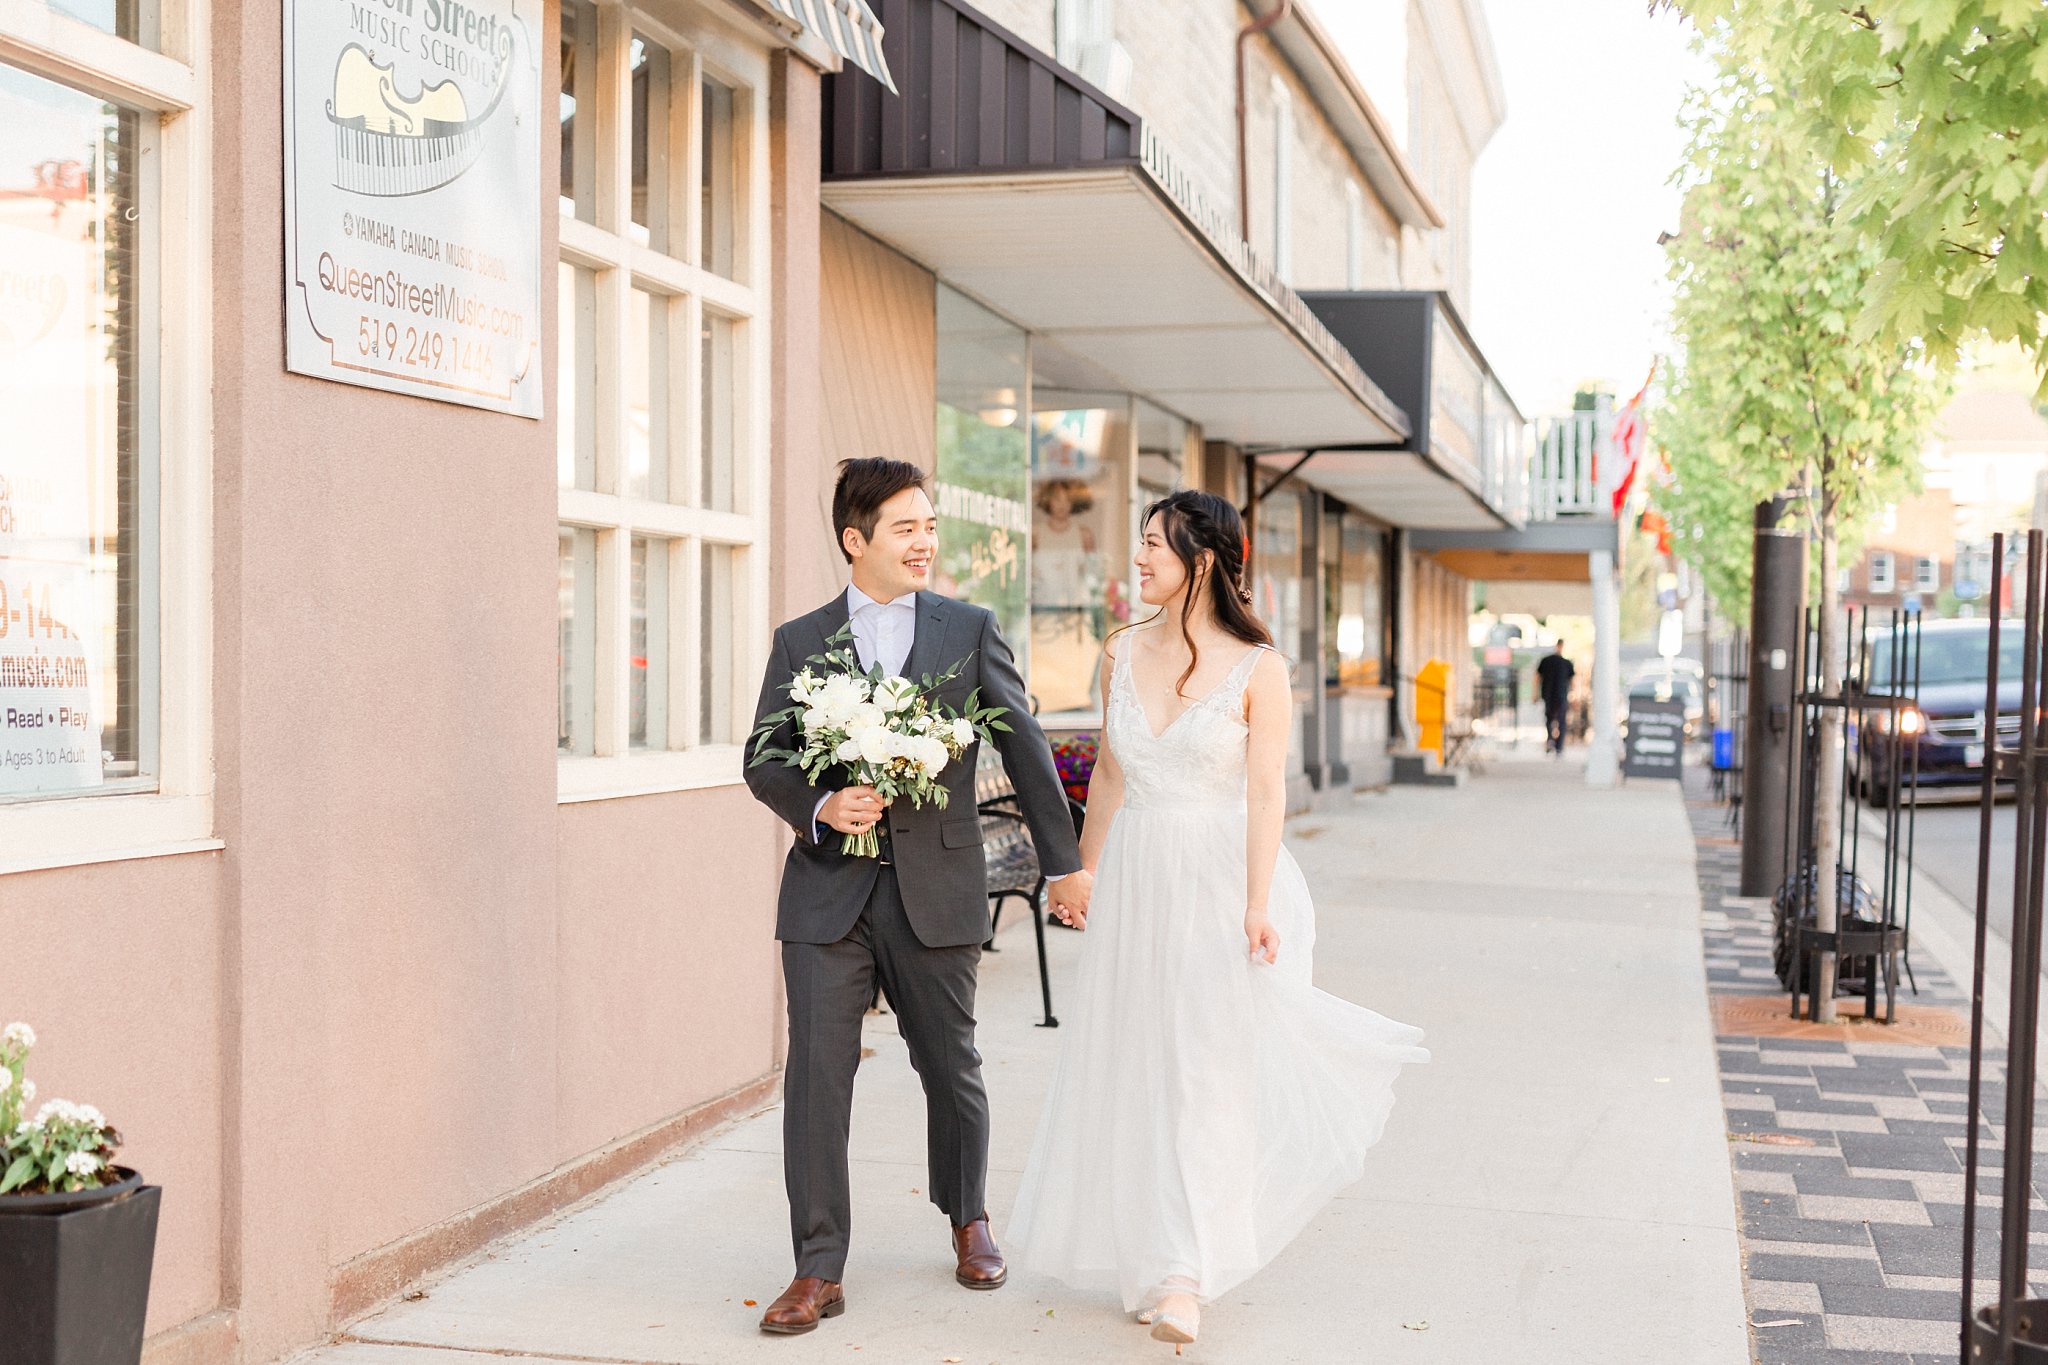 5 locations for your storehouse 408 wedding photos